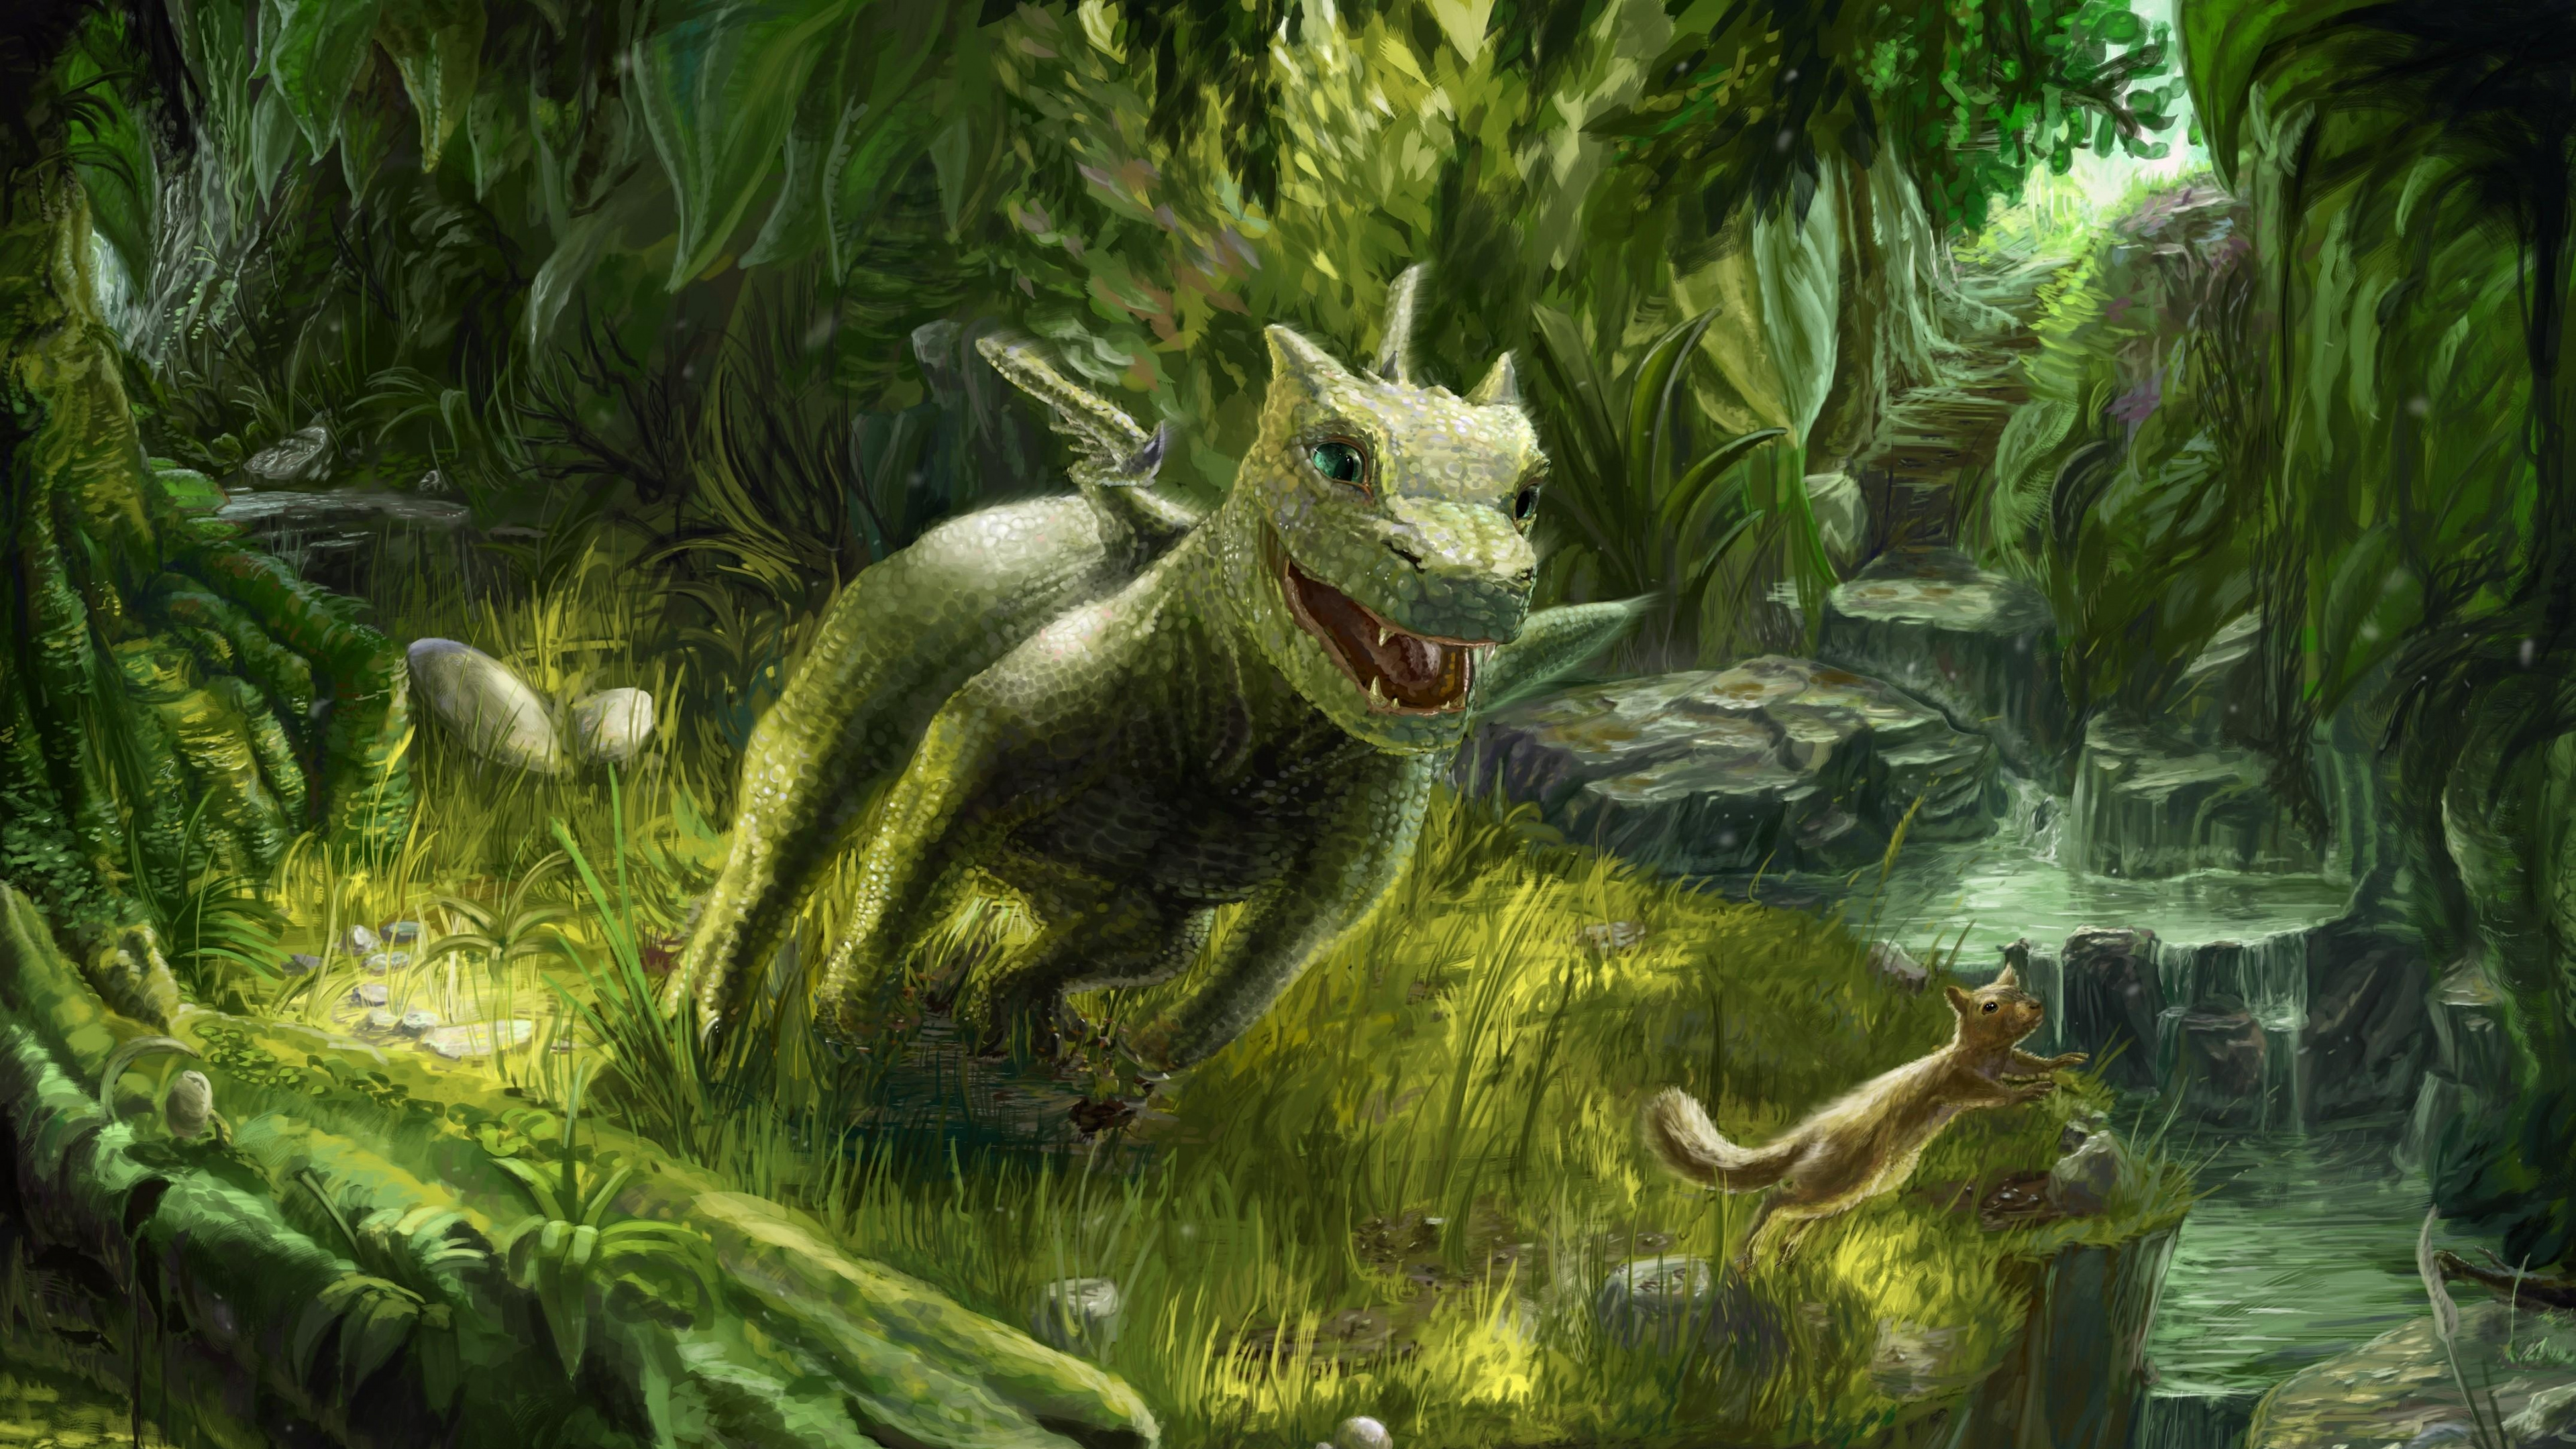 Green and Gray Dragon on Green Grass Painting. Wallpaper in 3840x2160 Resolution